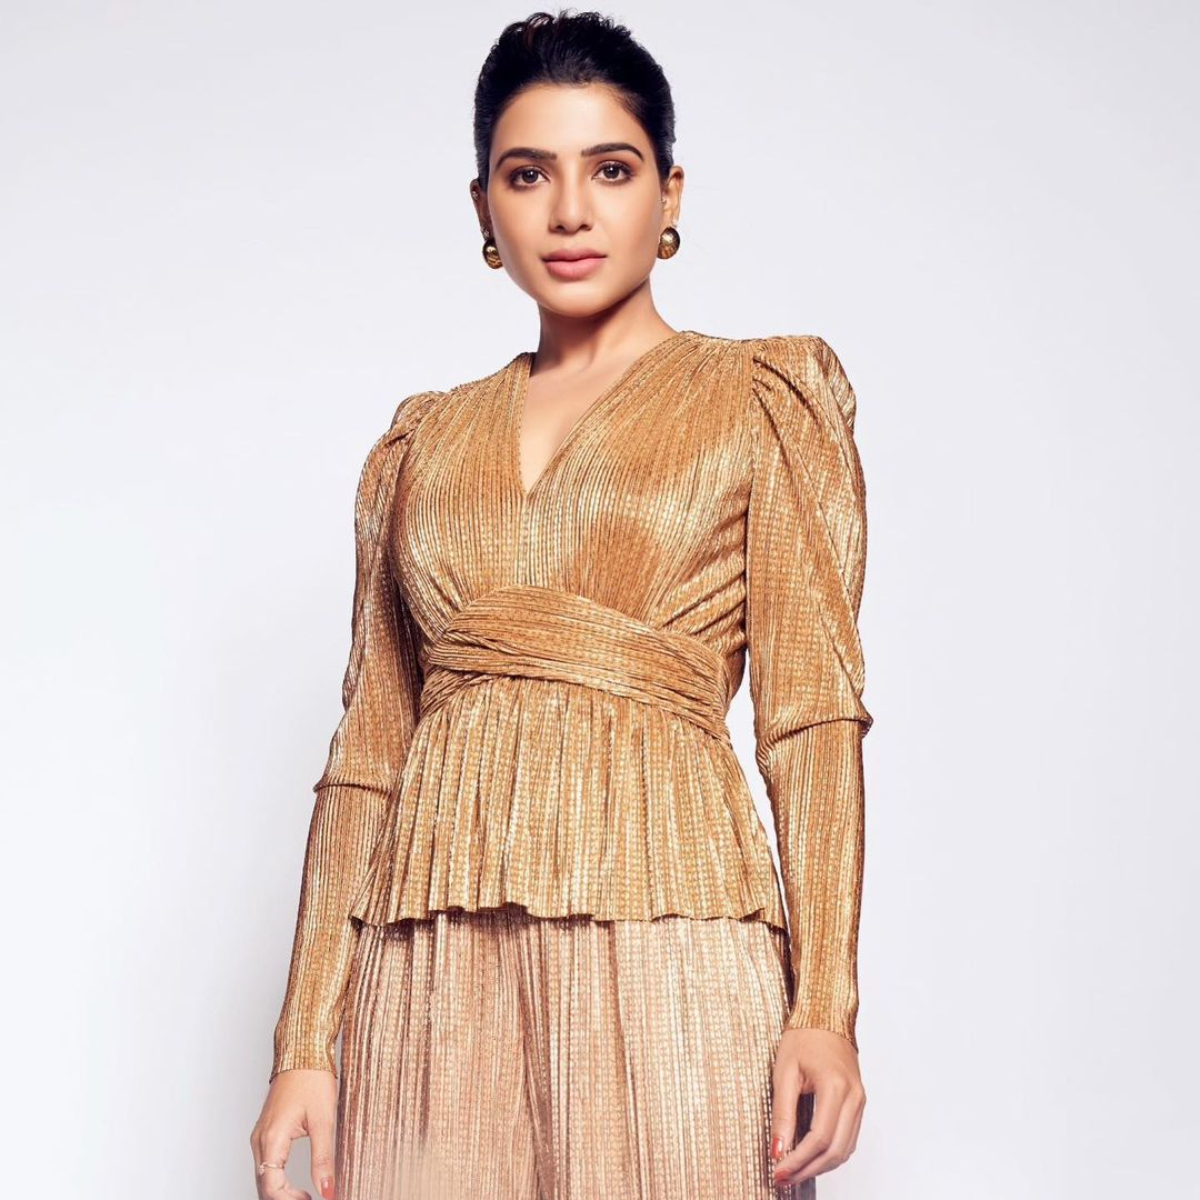 EXCLUSIVE: 'I'm feeling a little burnt out now, want to take a break', says Samantha Akkineni